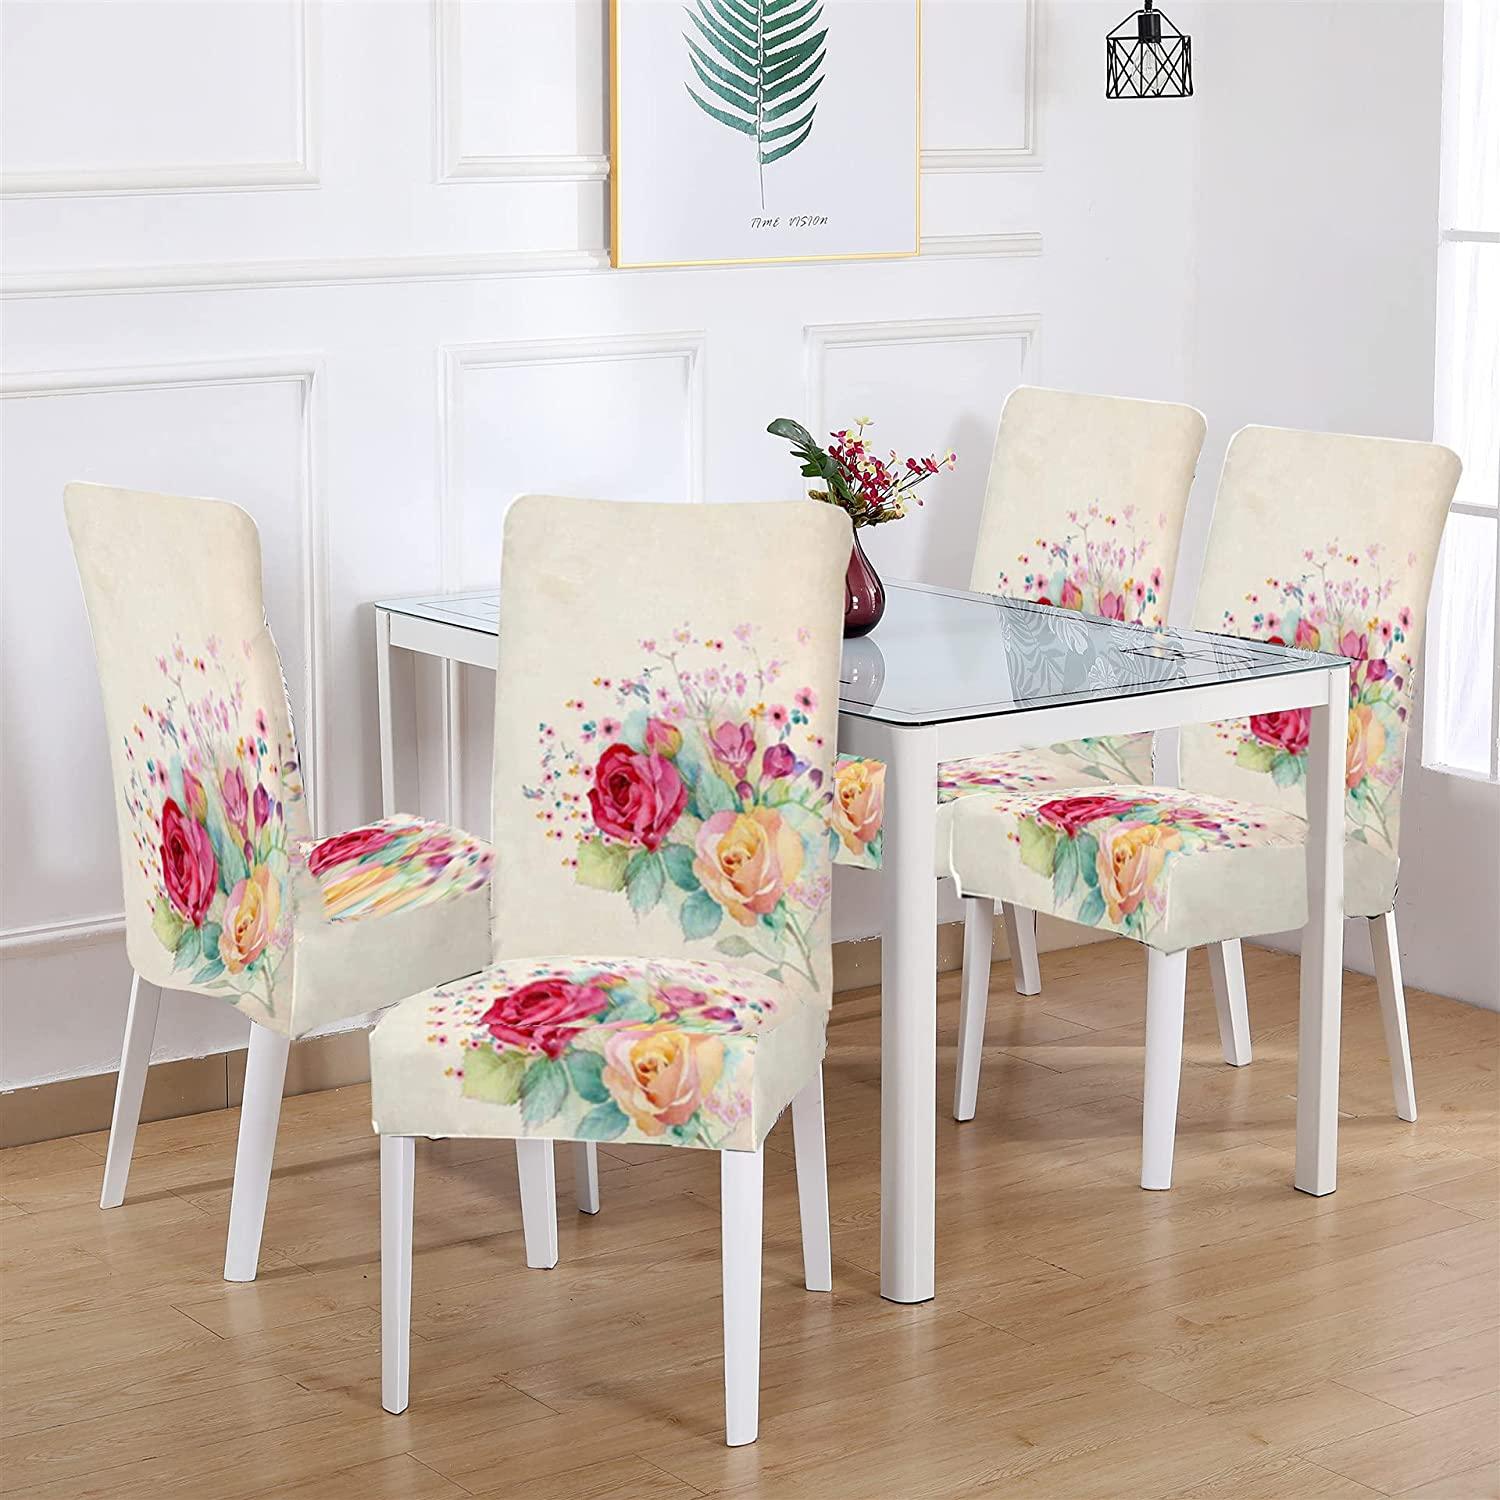 Stretchable Chair Covers, Rose Beige